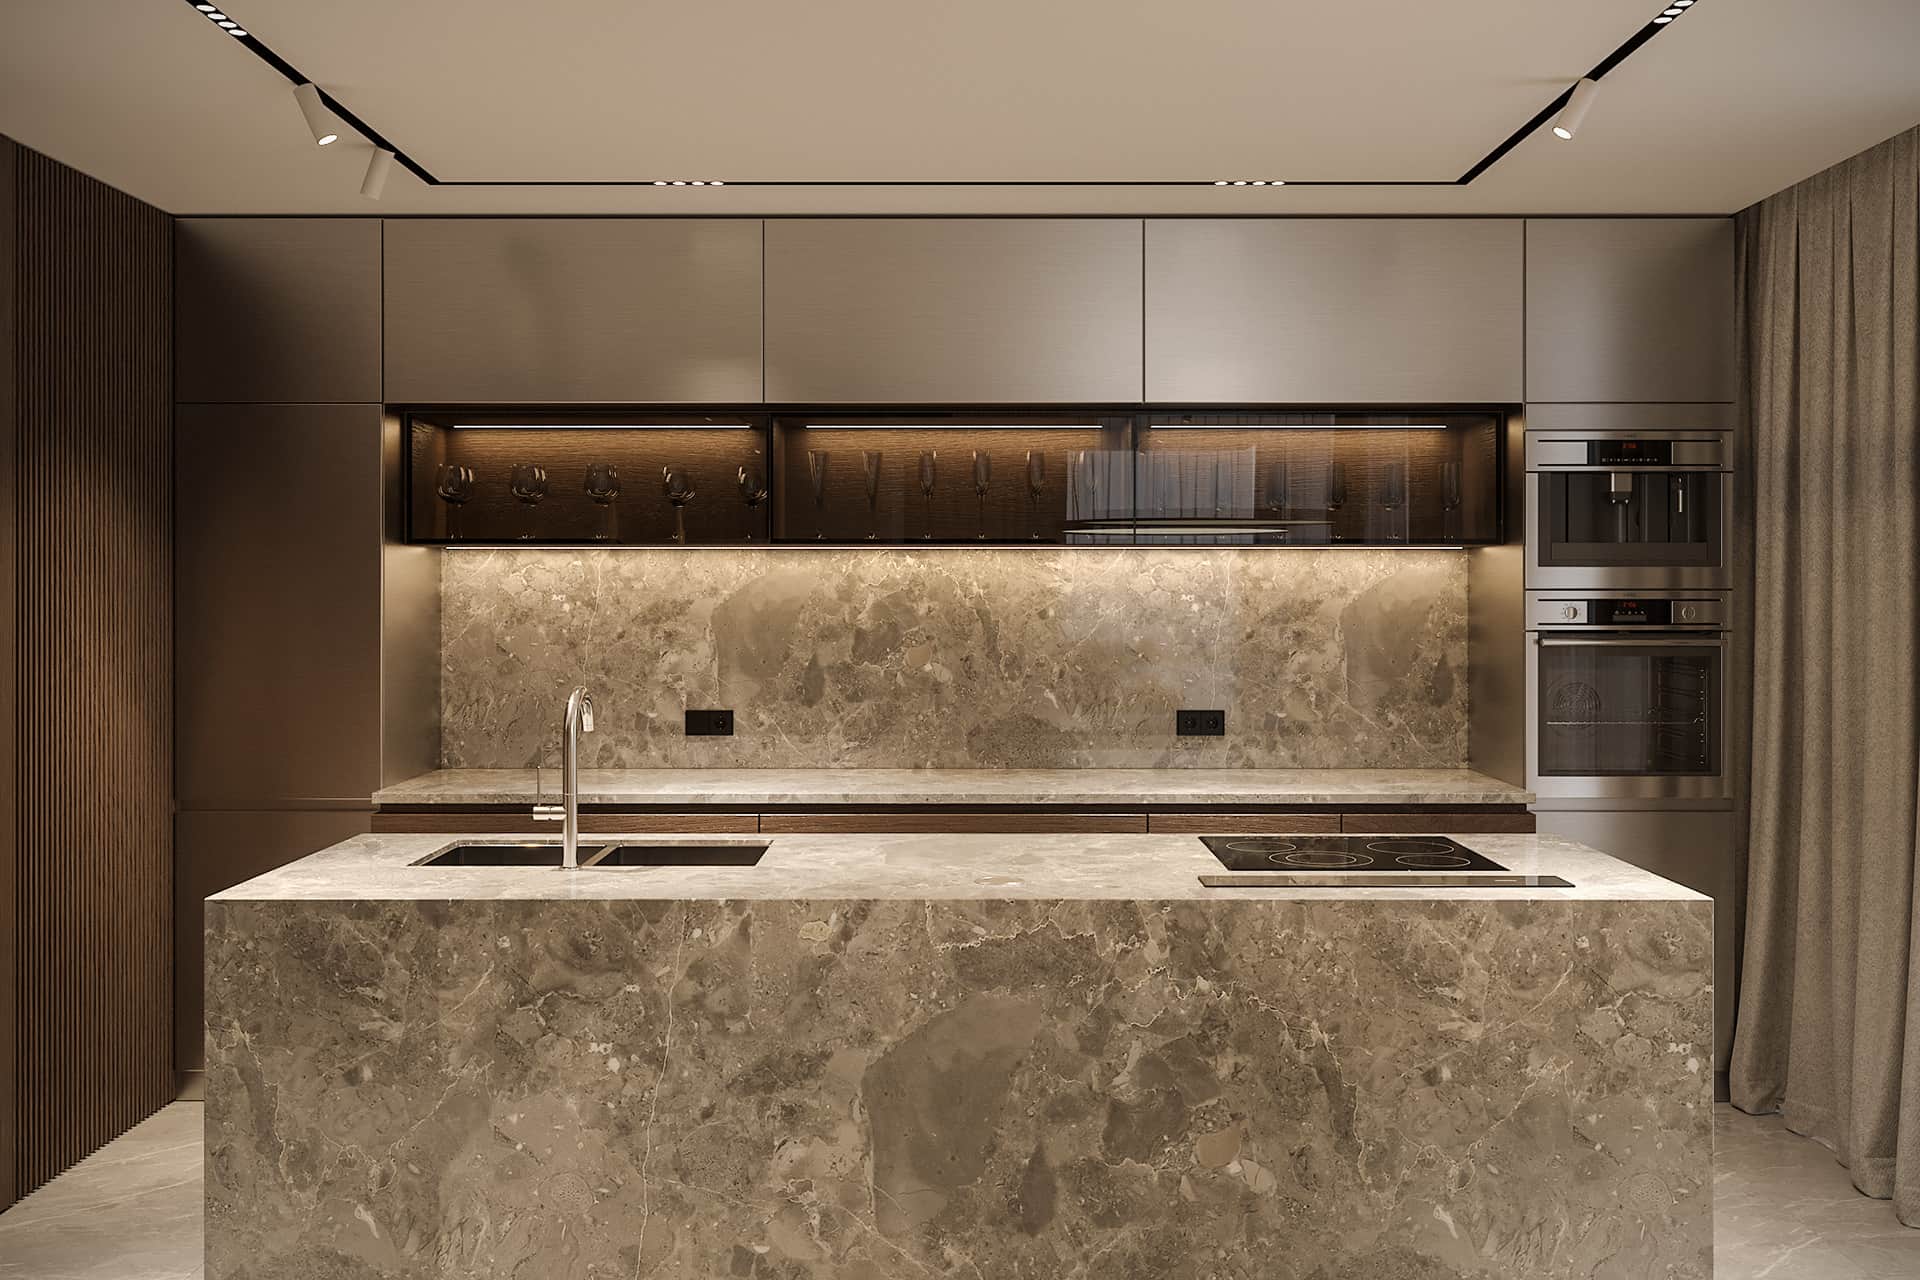 open cooking space using dark colour, marble beige-grey coloured countertop, in-built oven, in-built sink, cabinets